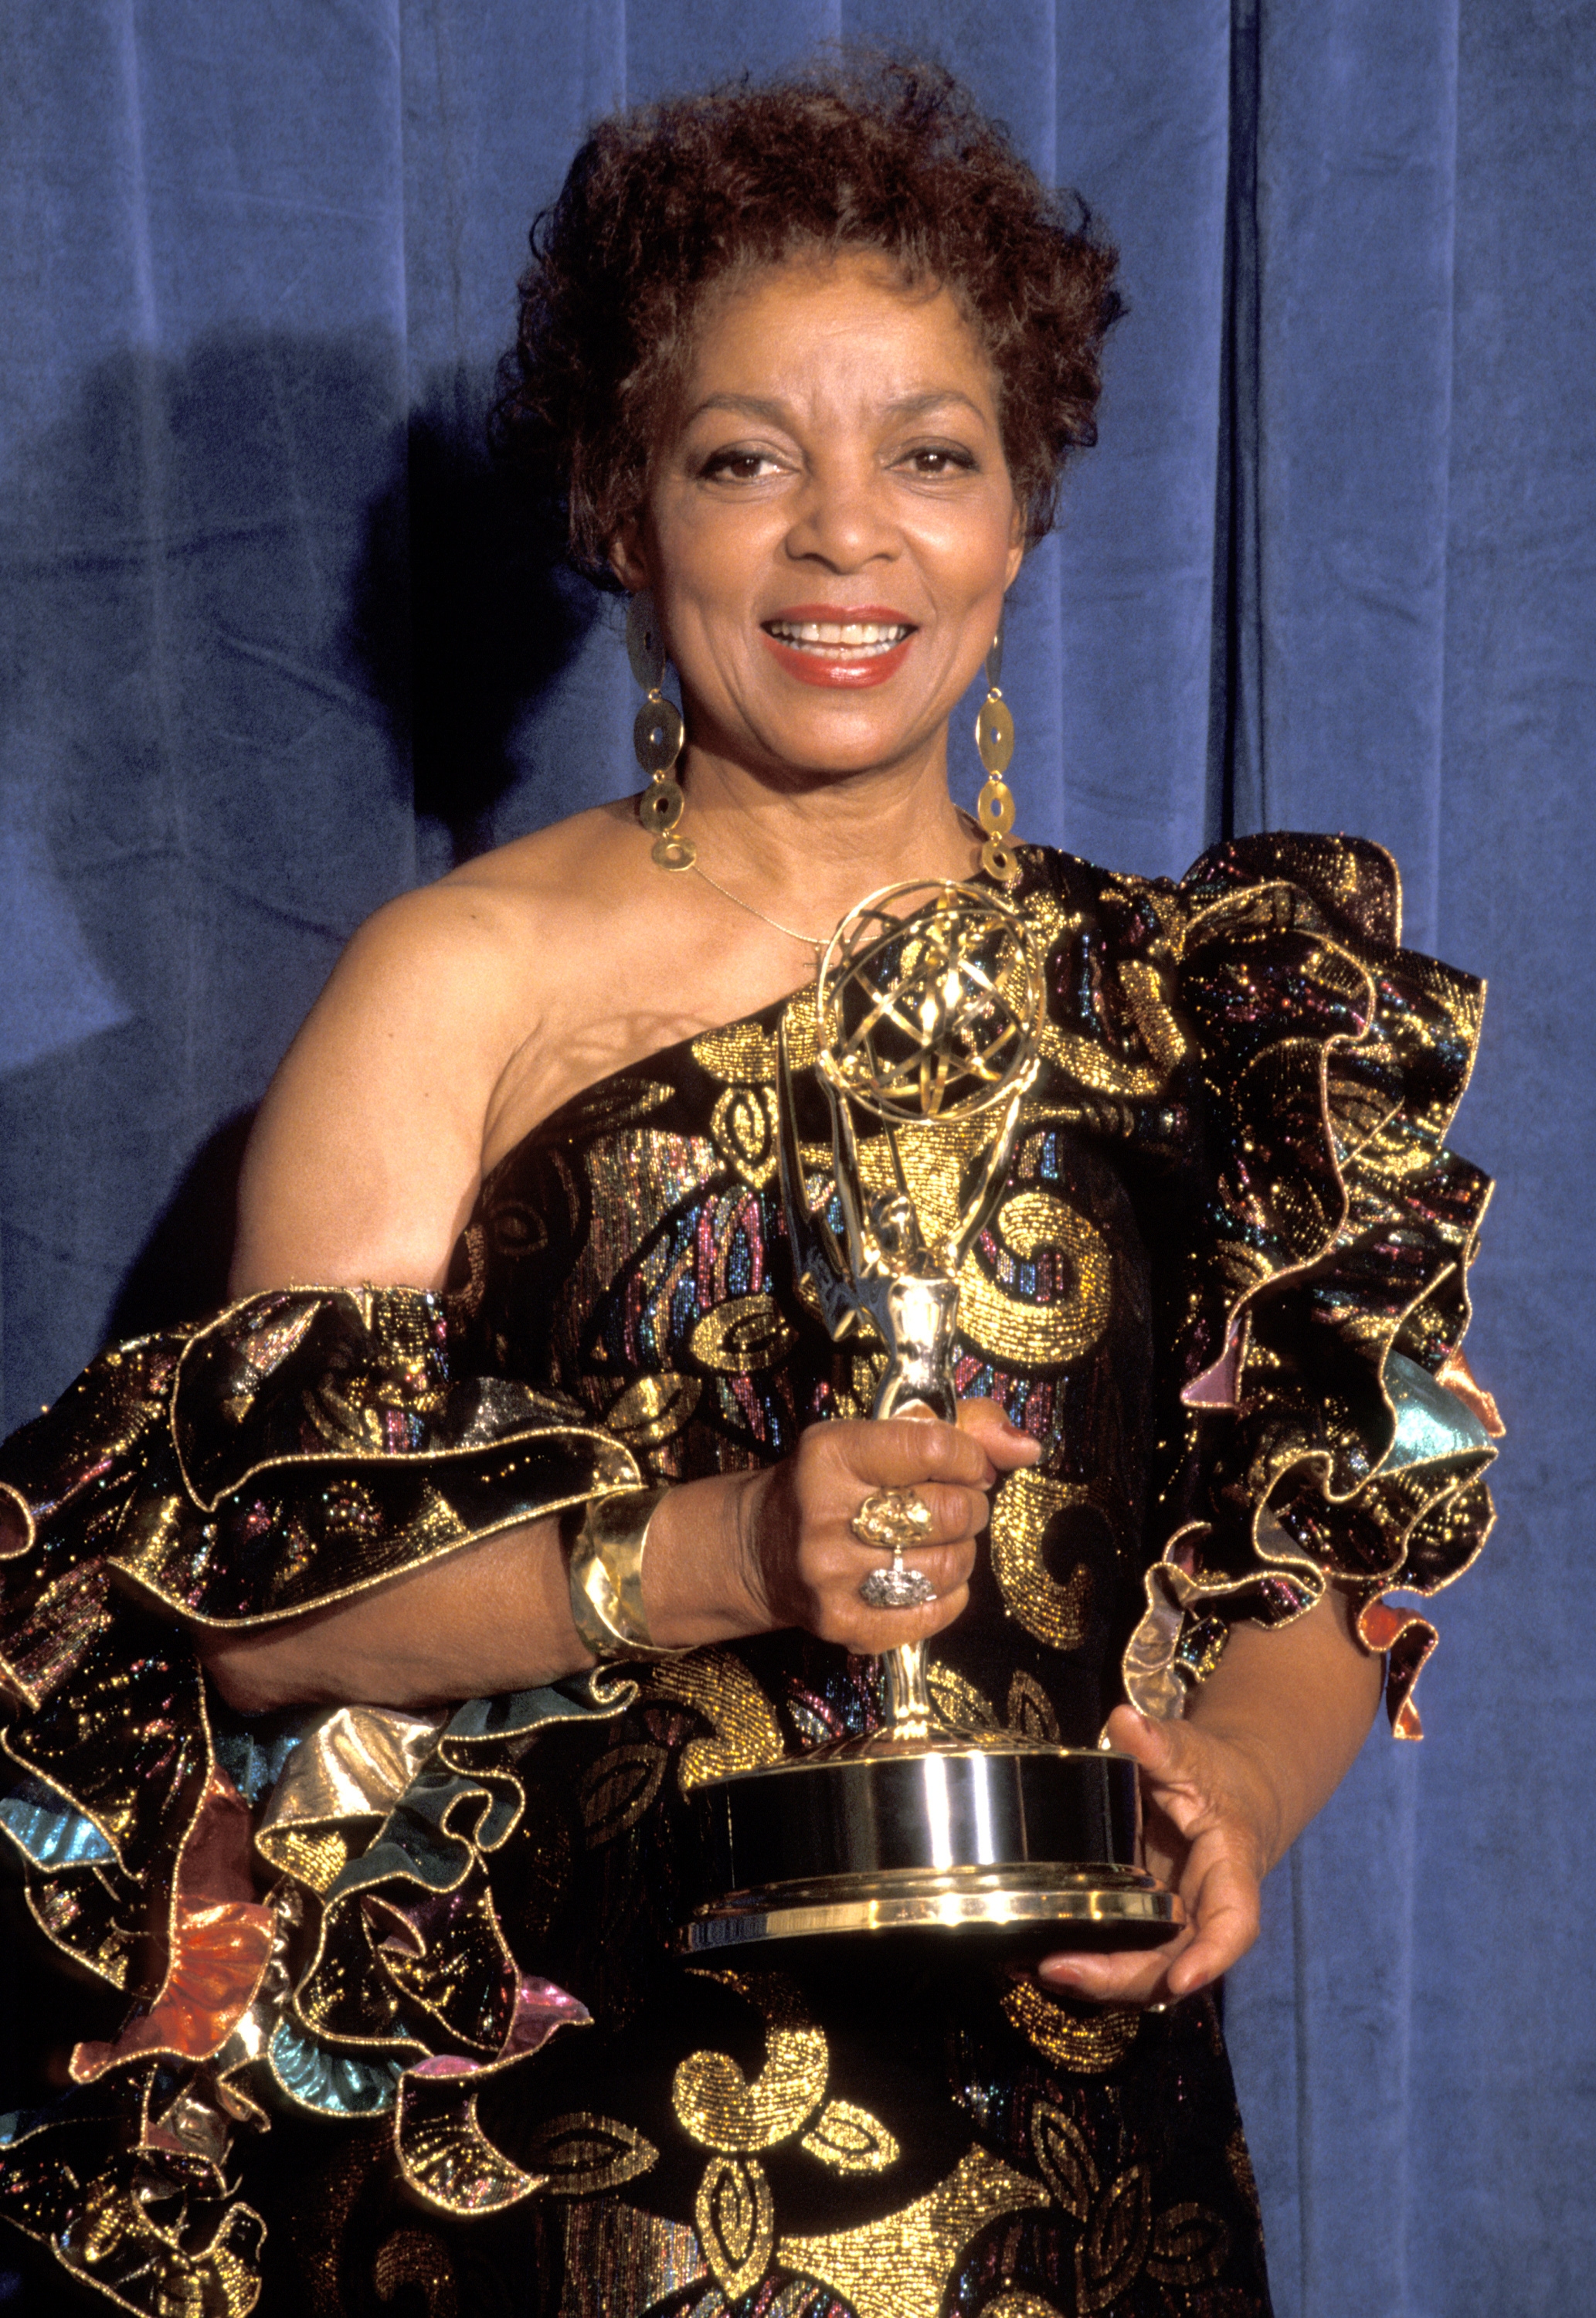 Ruby won an Emmy in 1991 for her role in Decoration Day. She would also win a Grammy and a Screen Actors Guild Award over the course of her career.